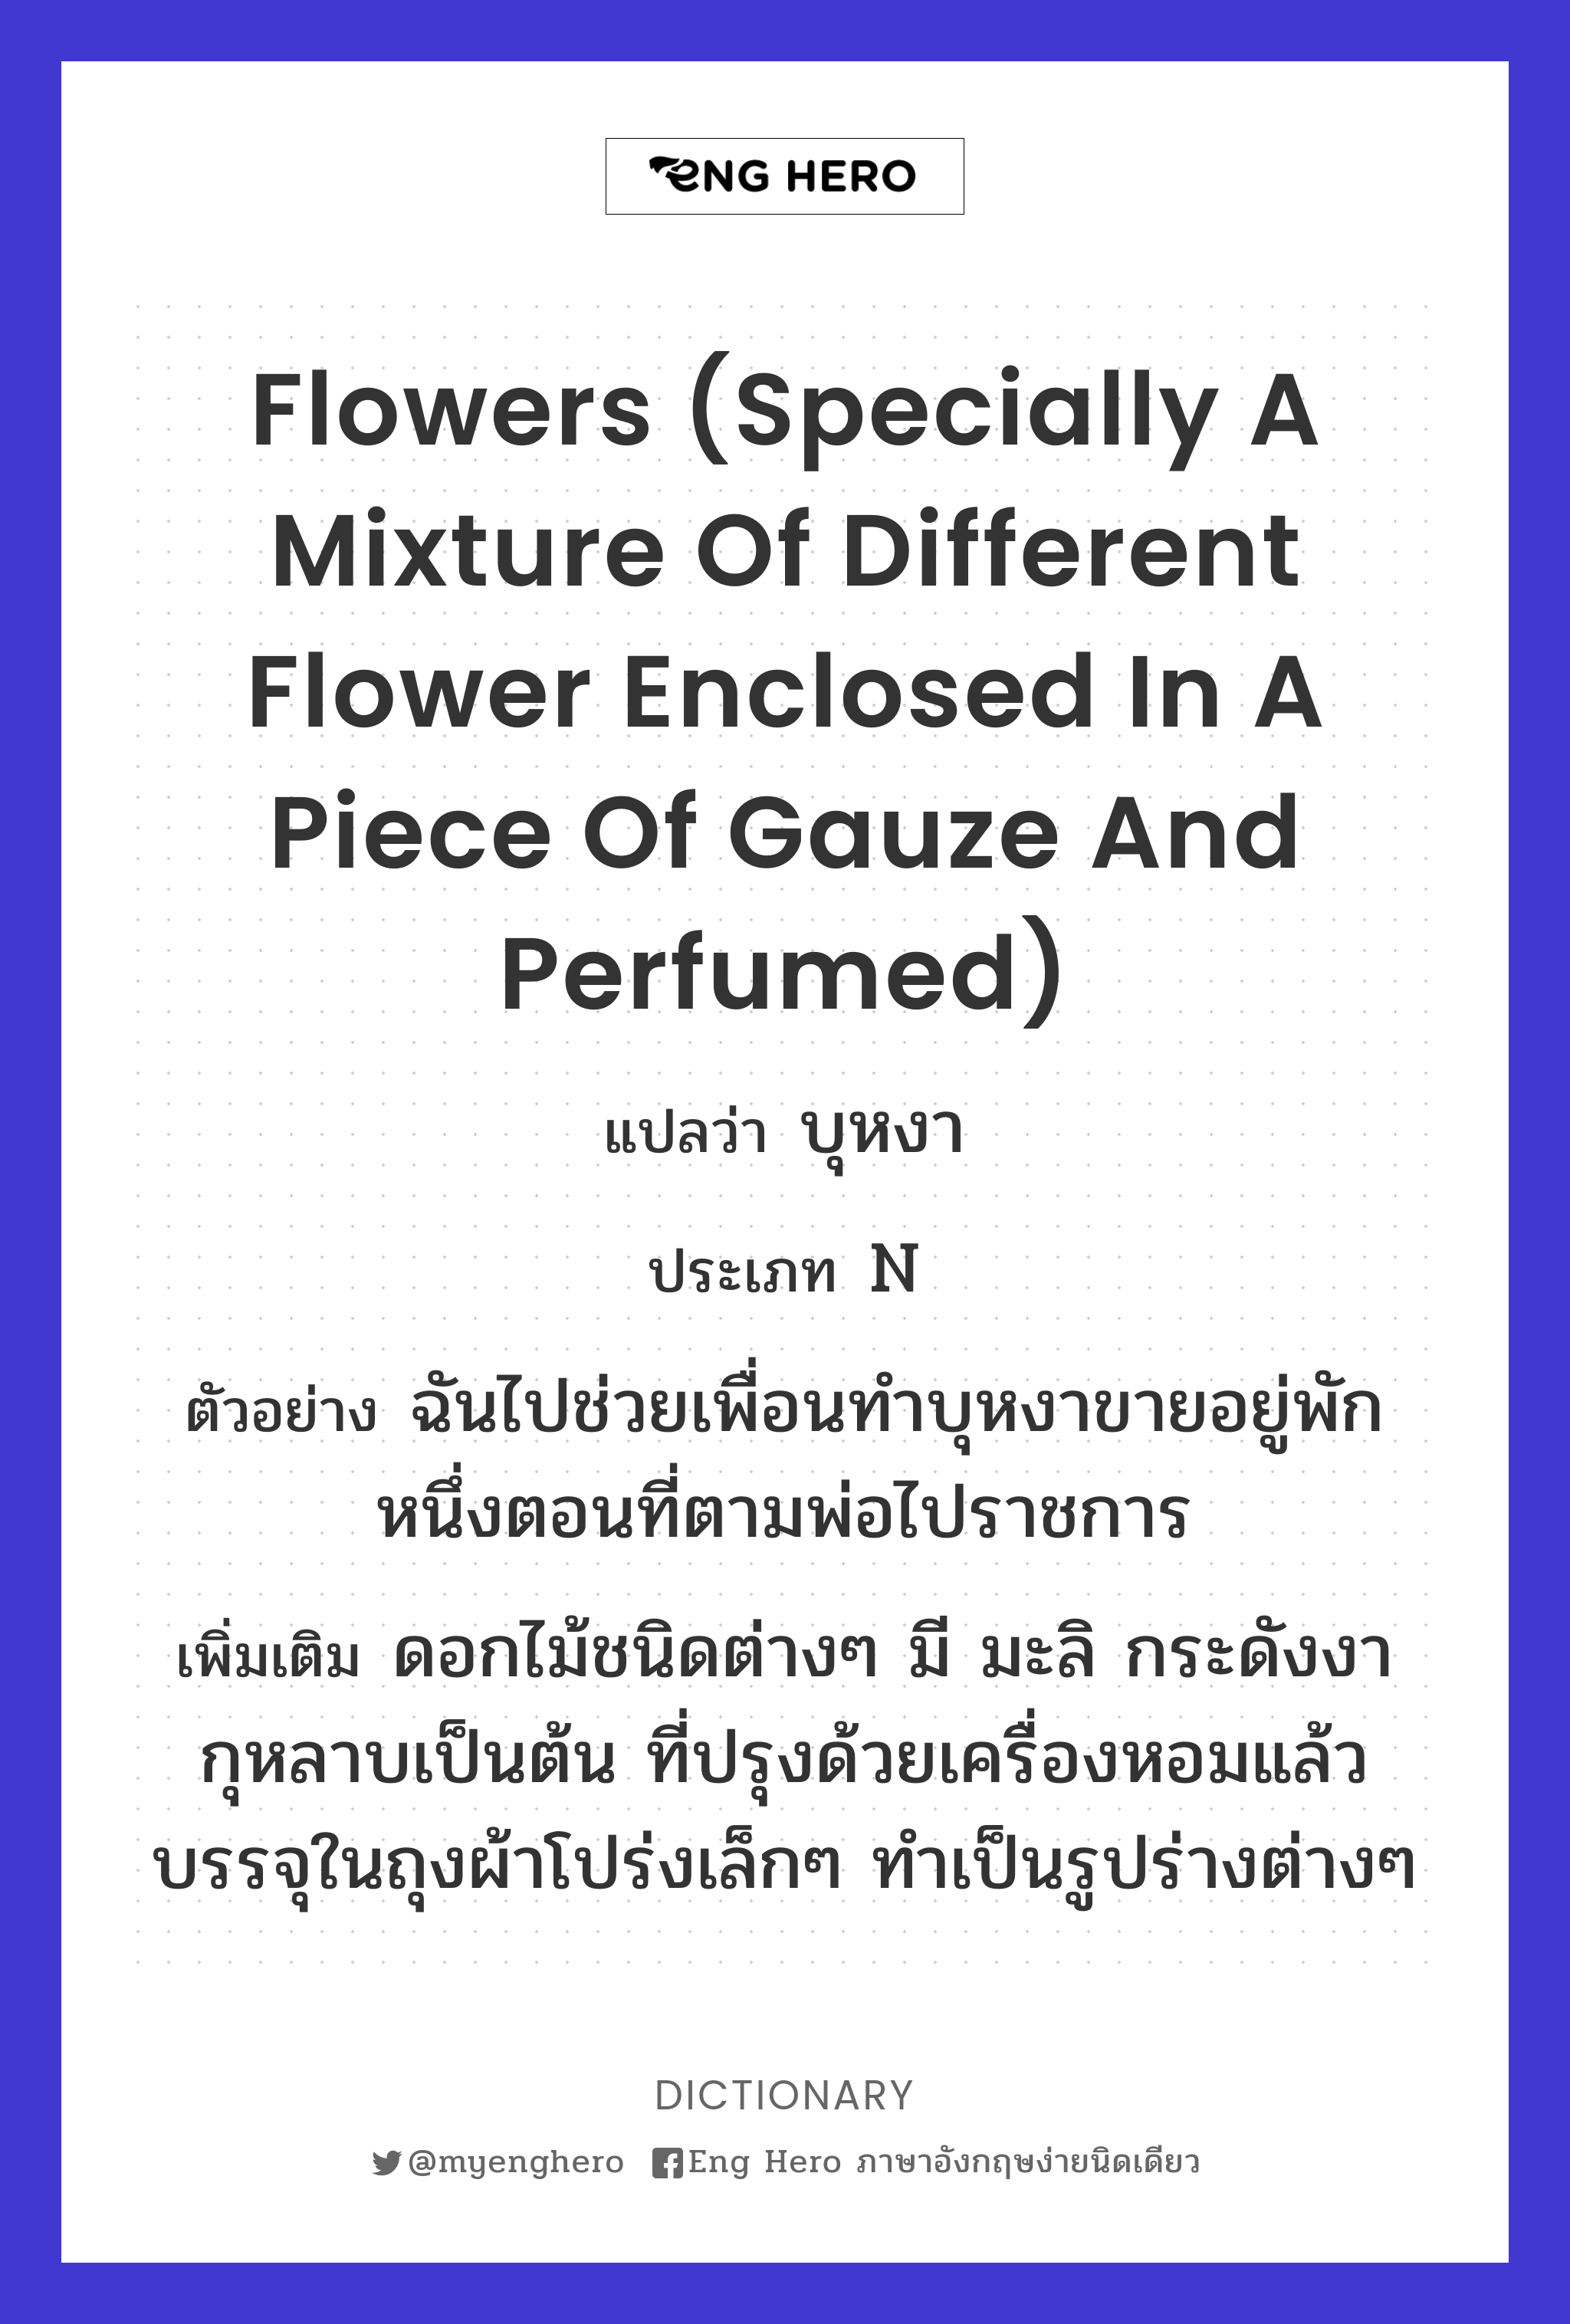 flowers (specially a mixture of different flower enclosed in a piece of gauze and perfumed)